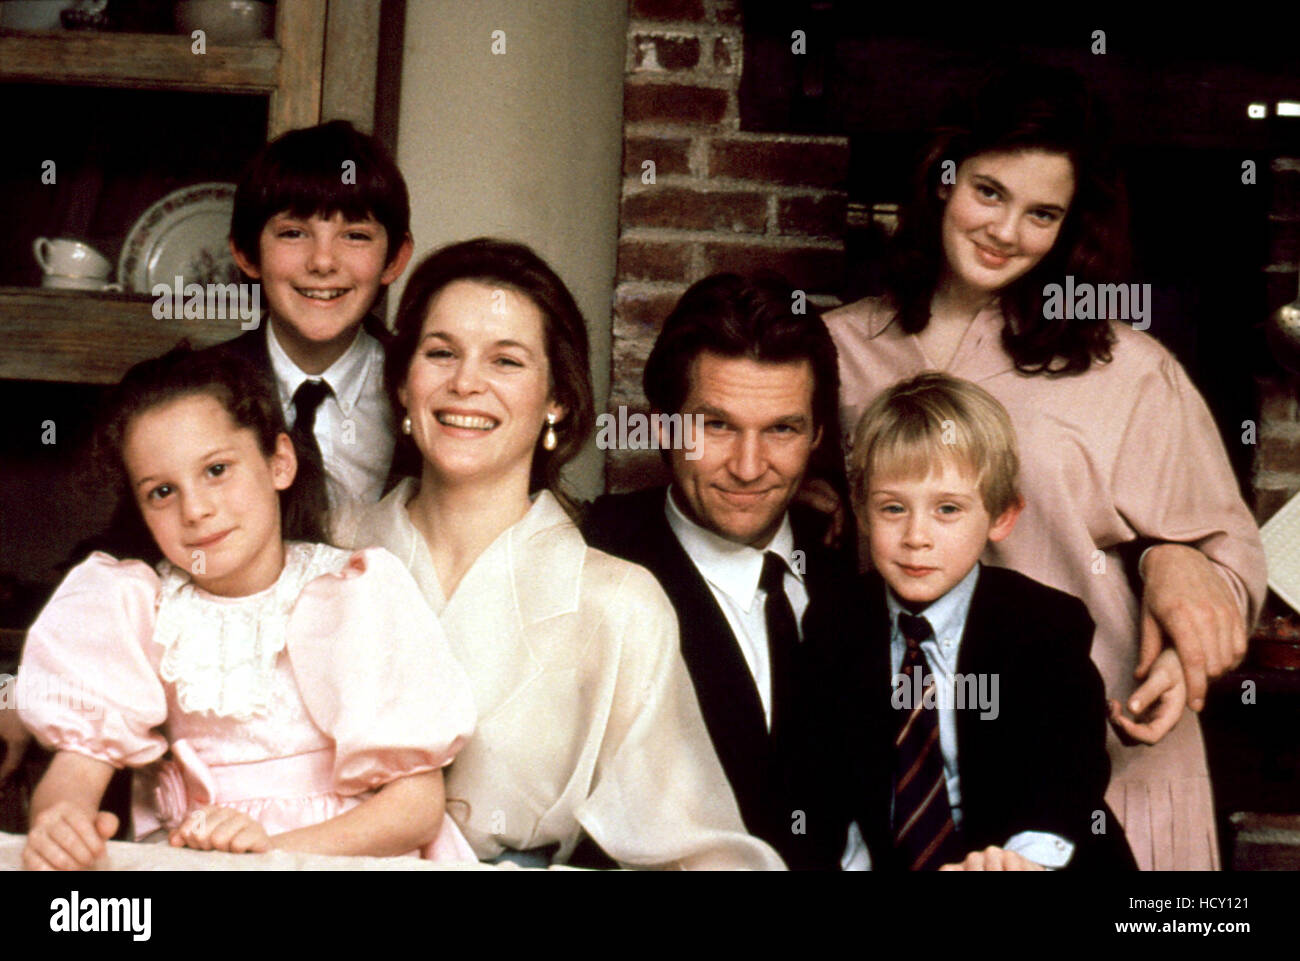 SEE YOU IN THE MORNING, Heather Lilly, Lukas Haas, Alice Krige, Jeff Bridges, Macaulay Culkin, Drew Barrymore, 1989 Stock Photo